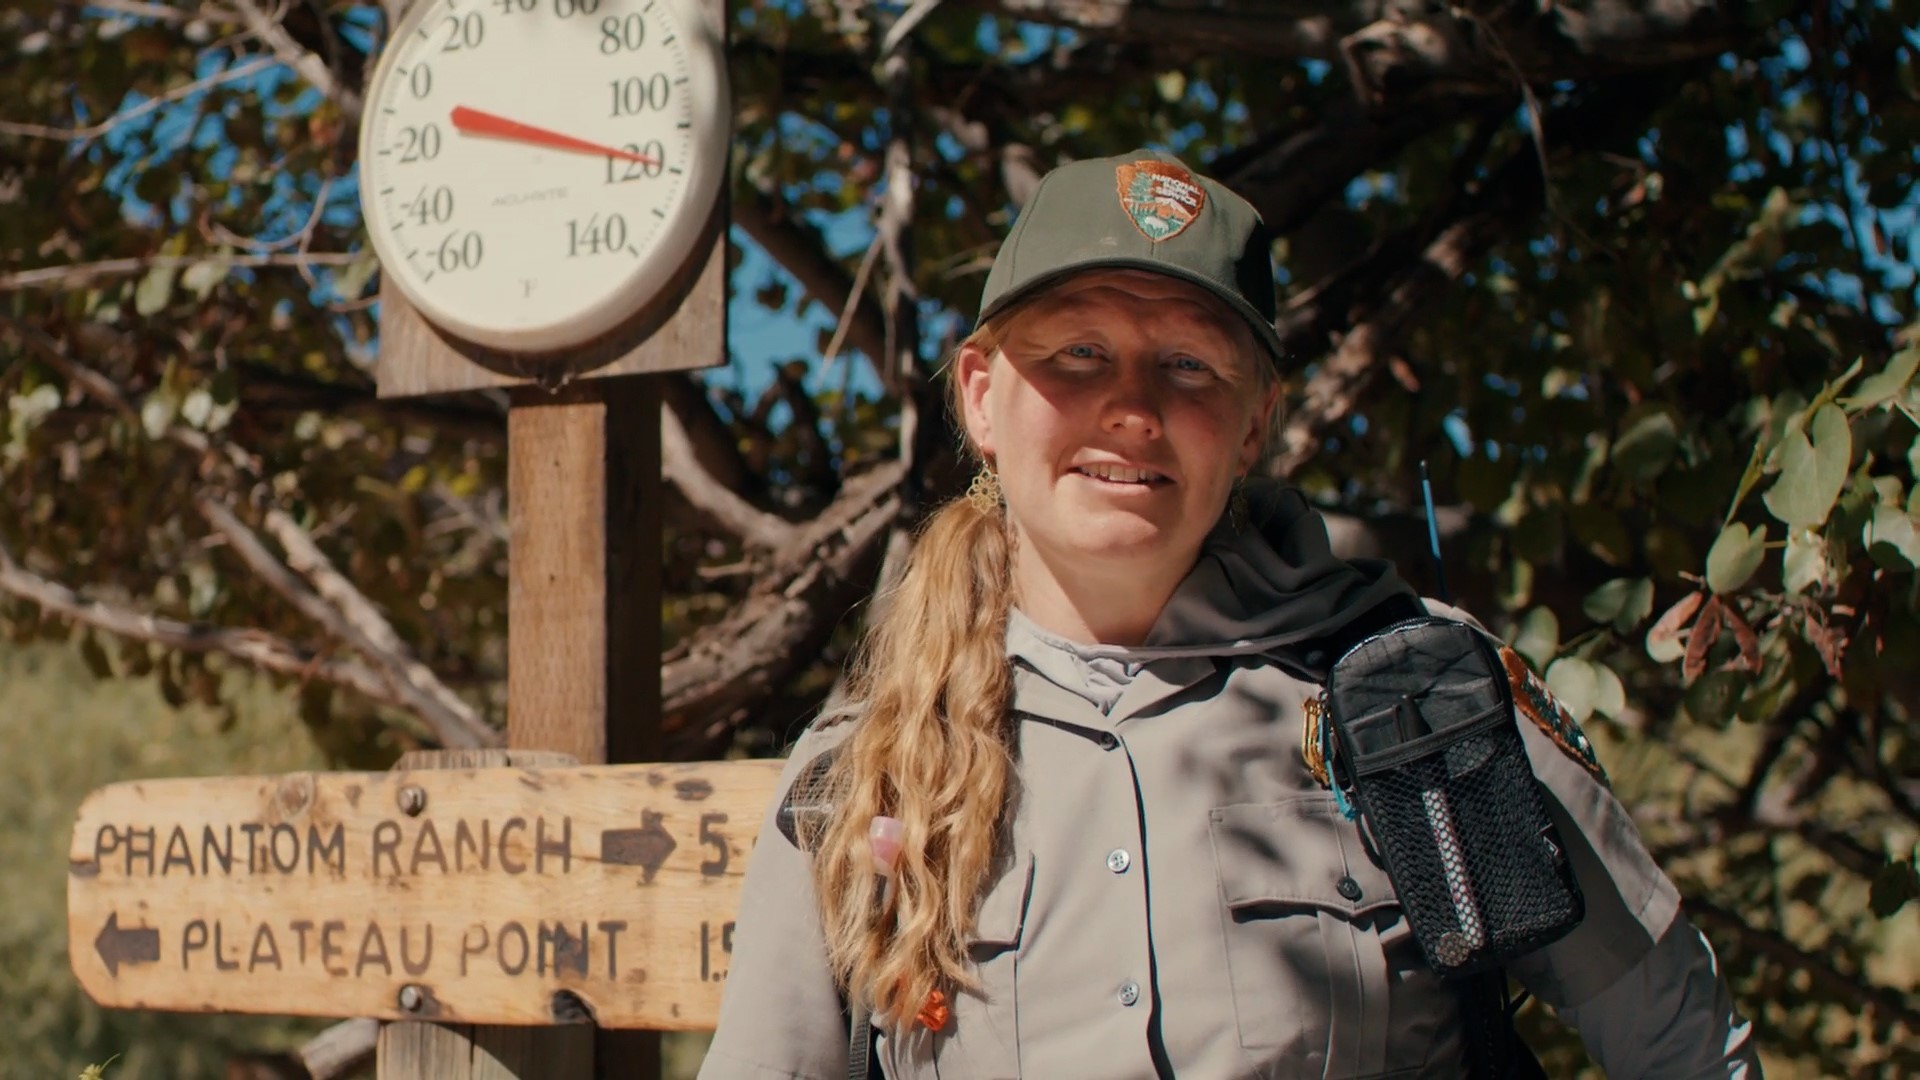 A ranger stands in front of a thermometer reaching 120+ degrees fahrenheit.